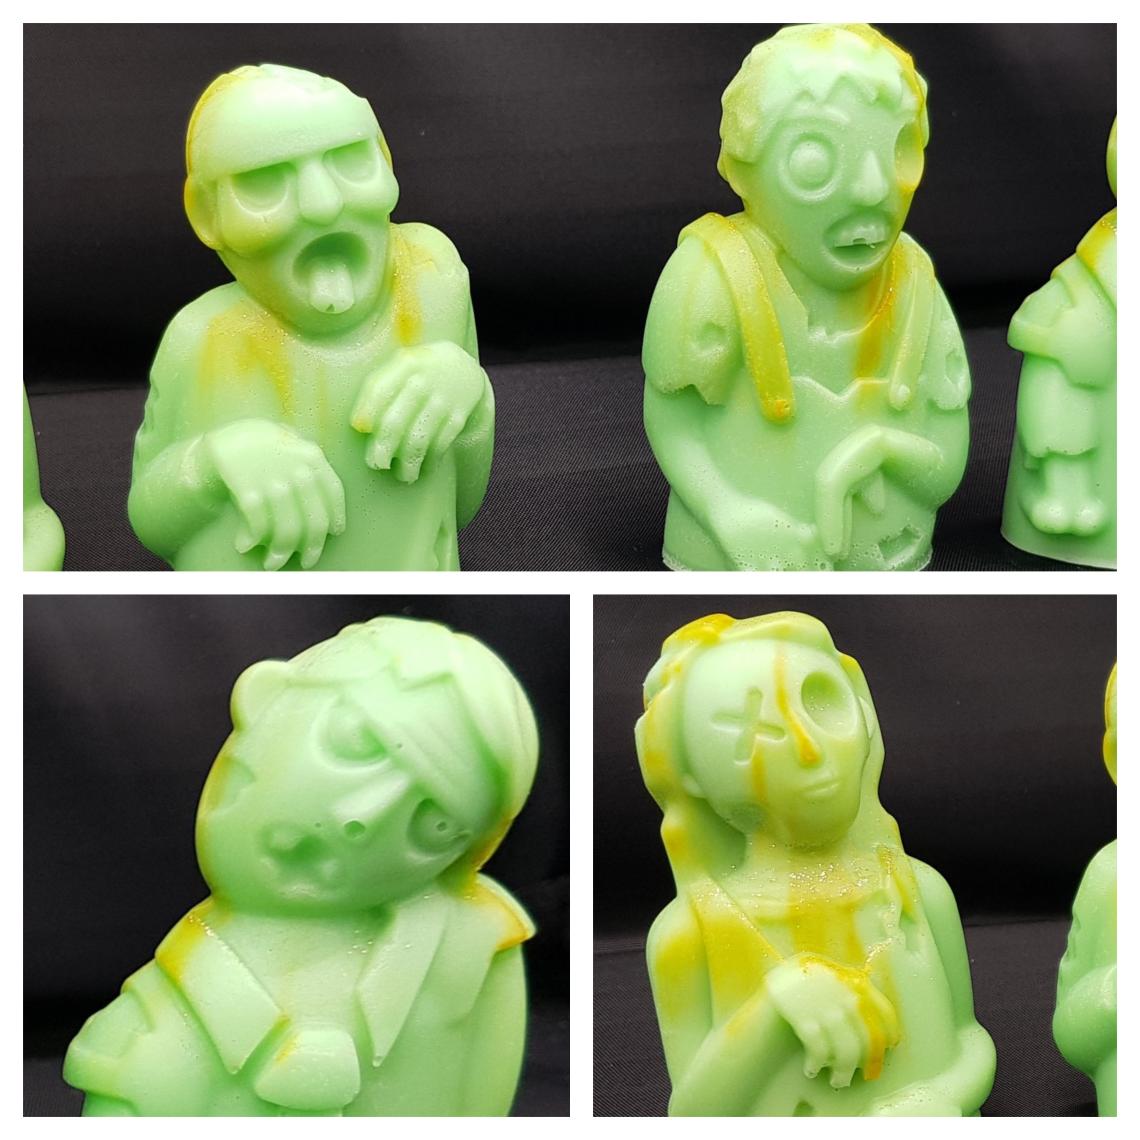 Zombie soaps in green for Elidyr Communities Trust.